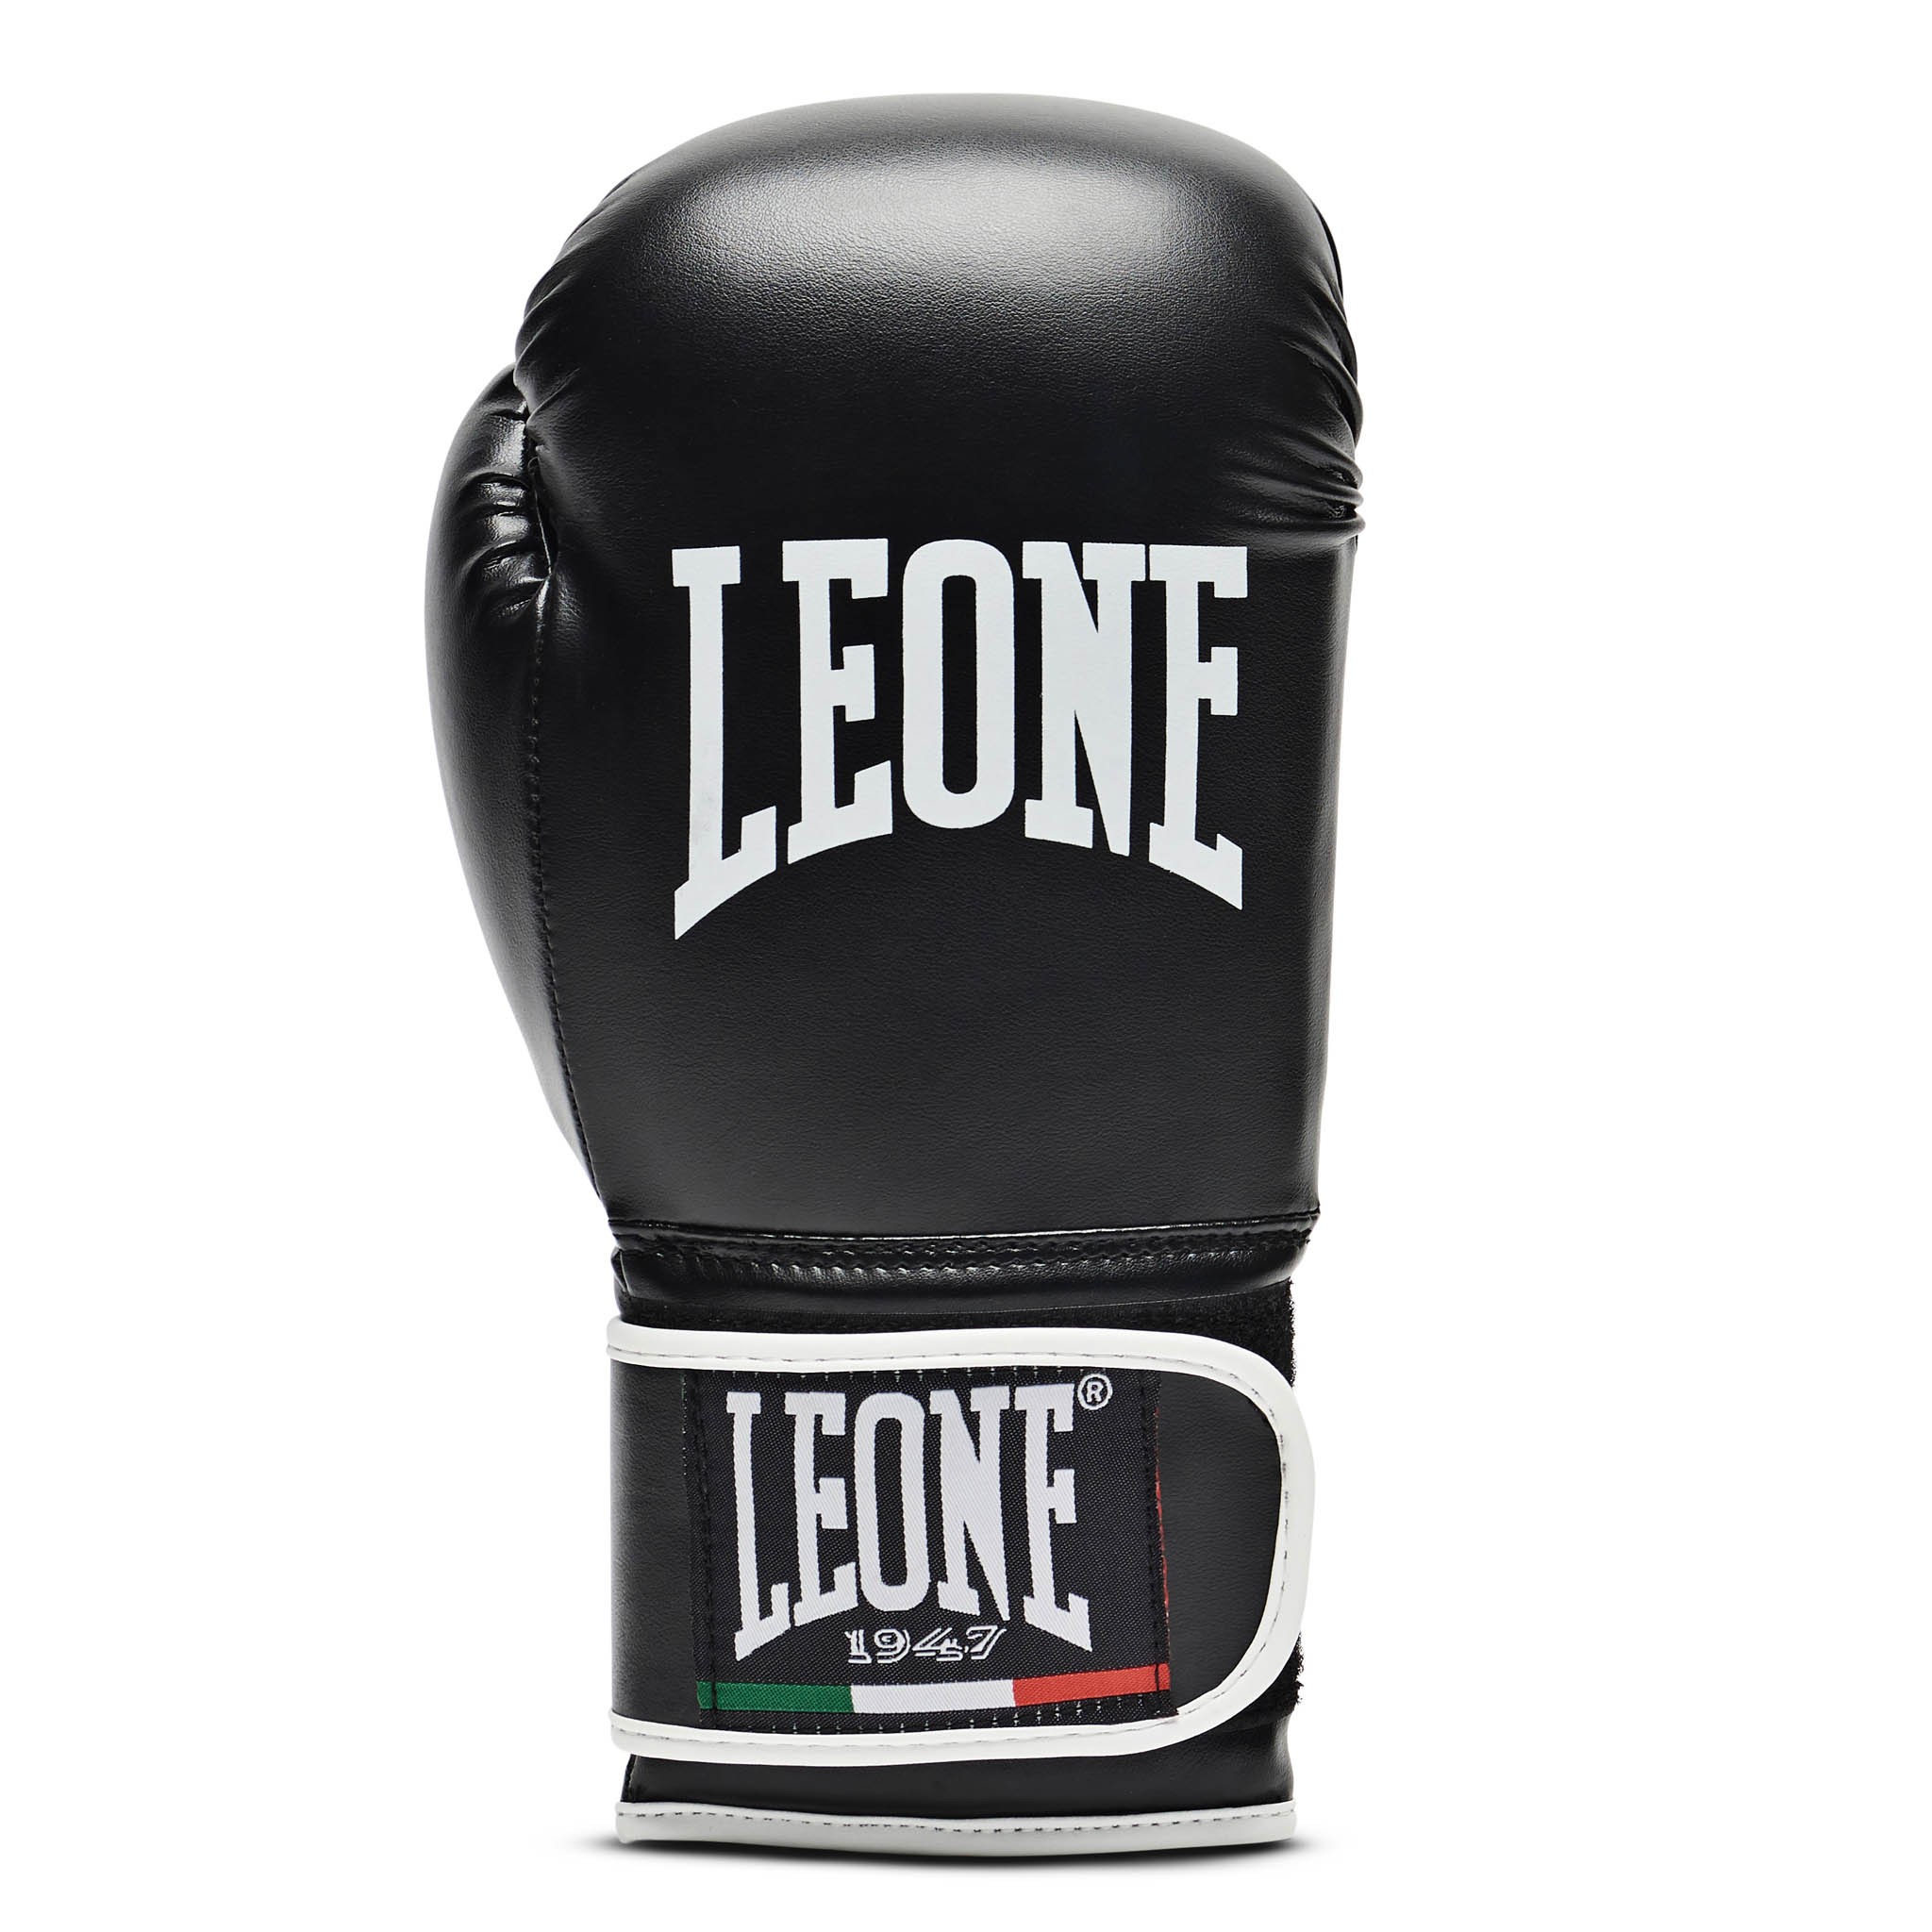 View our Leone 1947 Boxing gloves \\Flash\\ black GN083 at Barbar